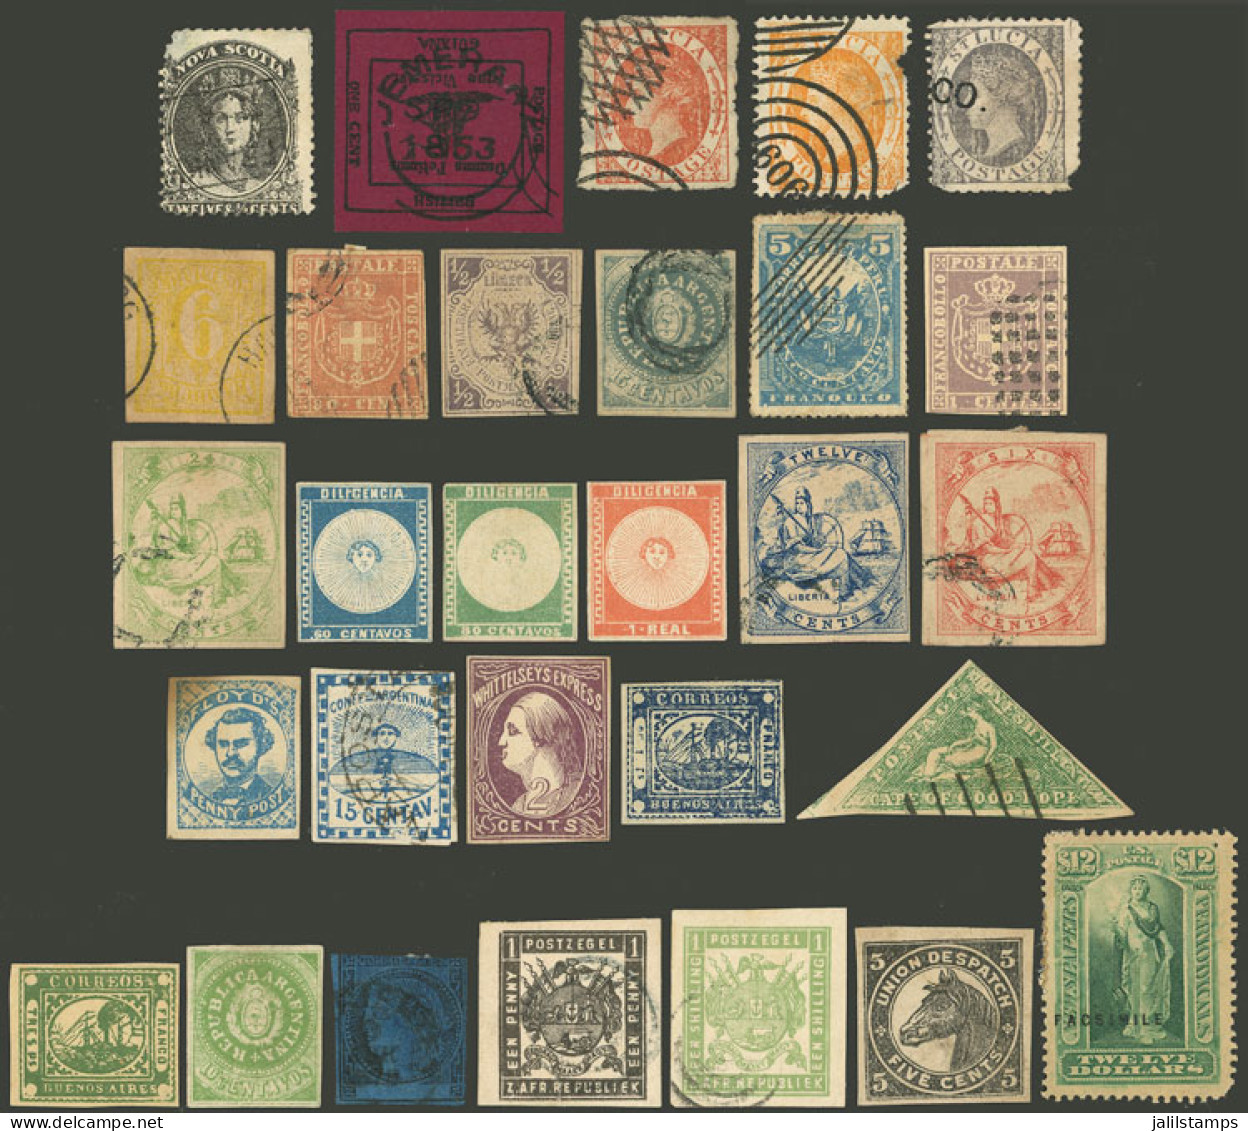 WORLDWIDE: FORGERIES: Interesting Lot Of Forged Stamps Of Varied Countries, In General Old, Some Are Very Well Made, Ver - Lots & Kiloware (mixtures) - Max. 999 Stamps